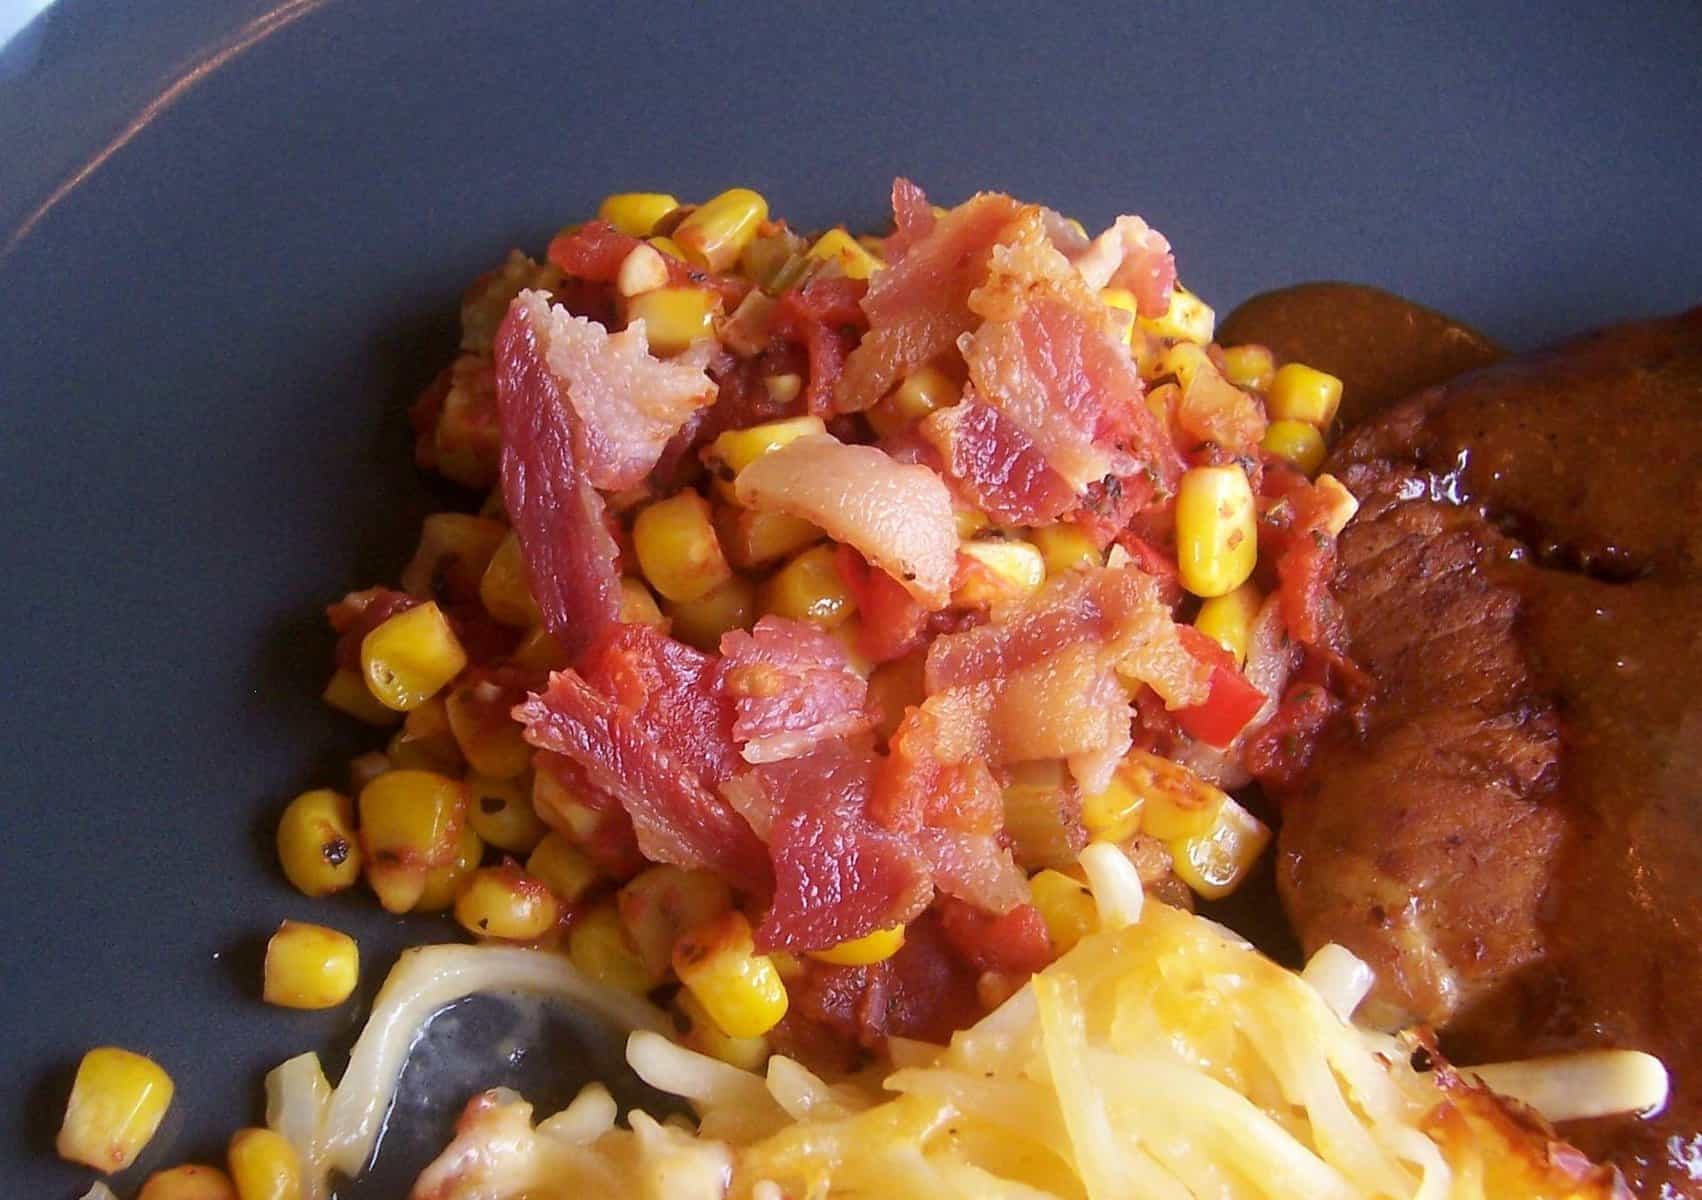  The combination of sweet corn, spicy andouille sausage, and savory seasonings creates a mouthwatering dish.